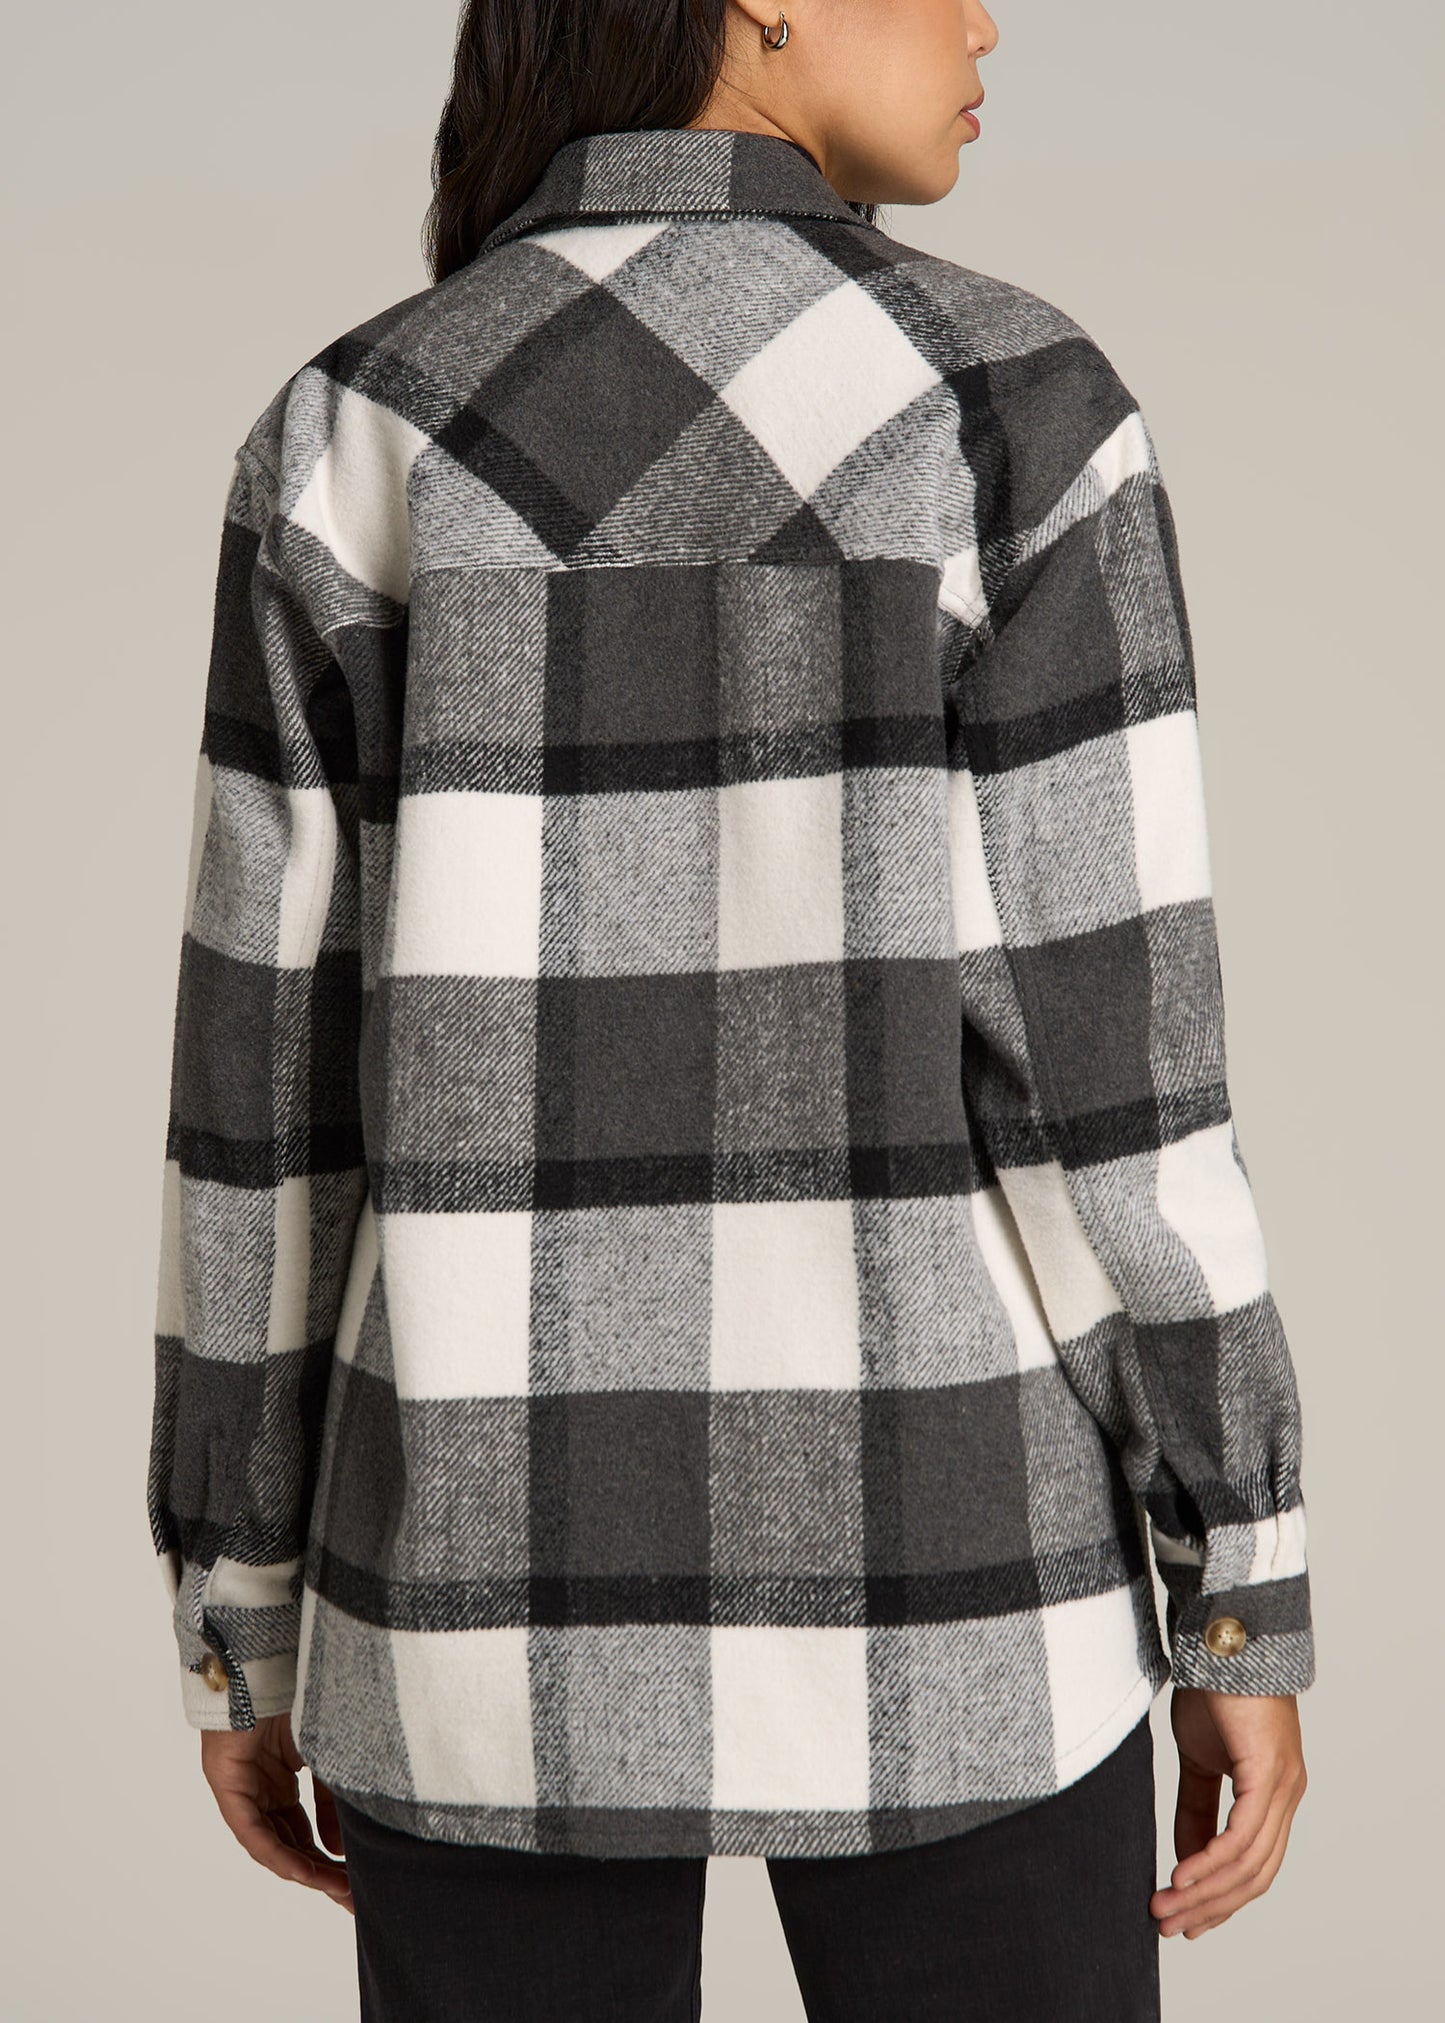 Flannel Women's Tall Shacket in Grey and Black Plaid